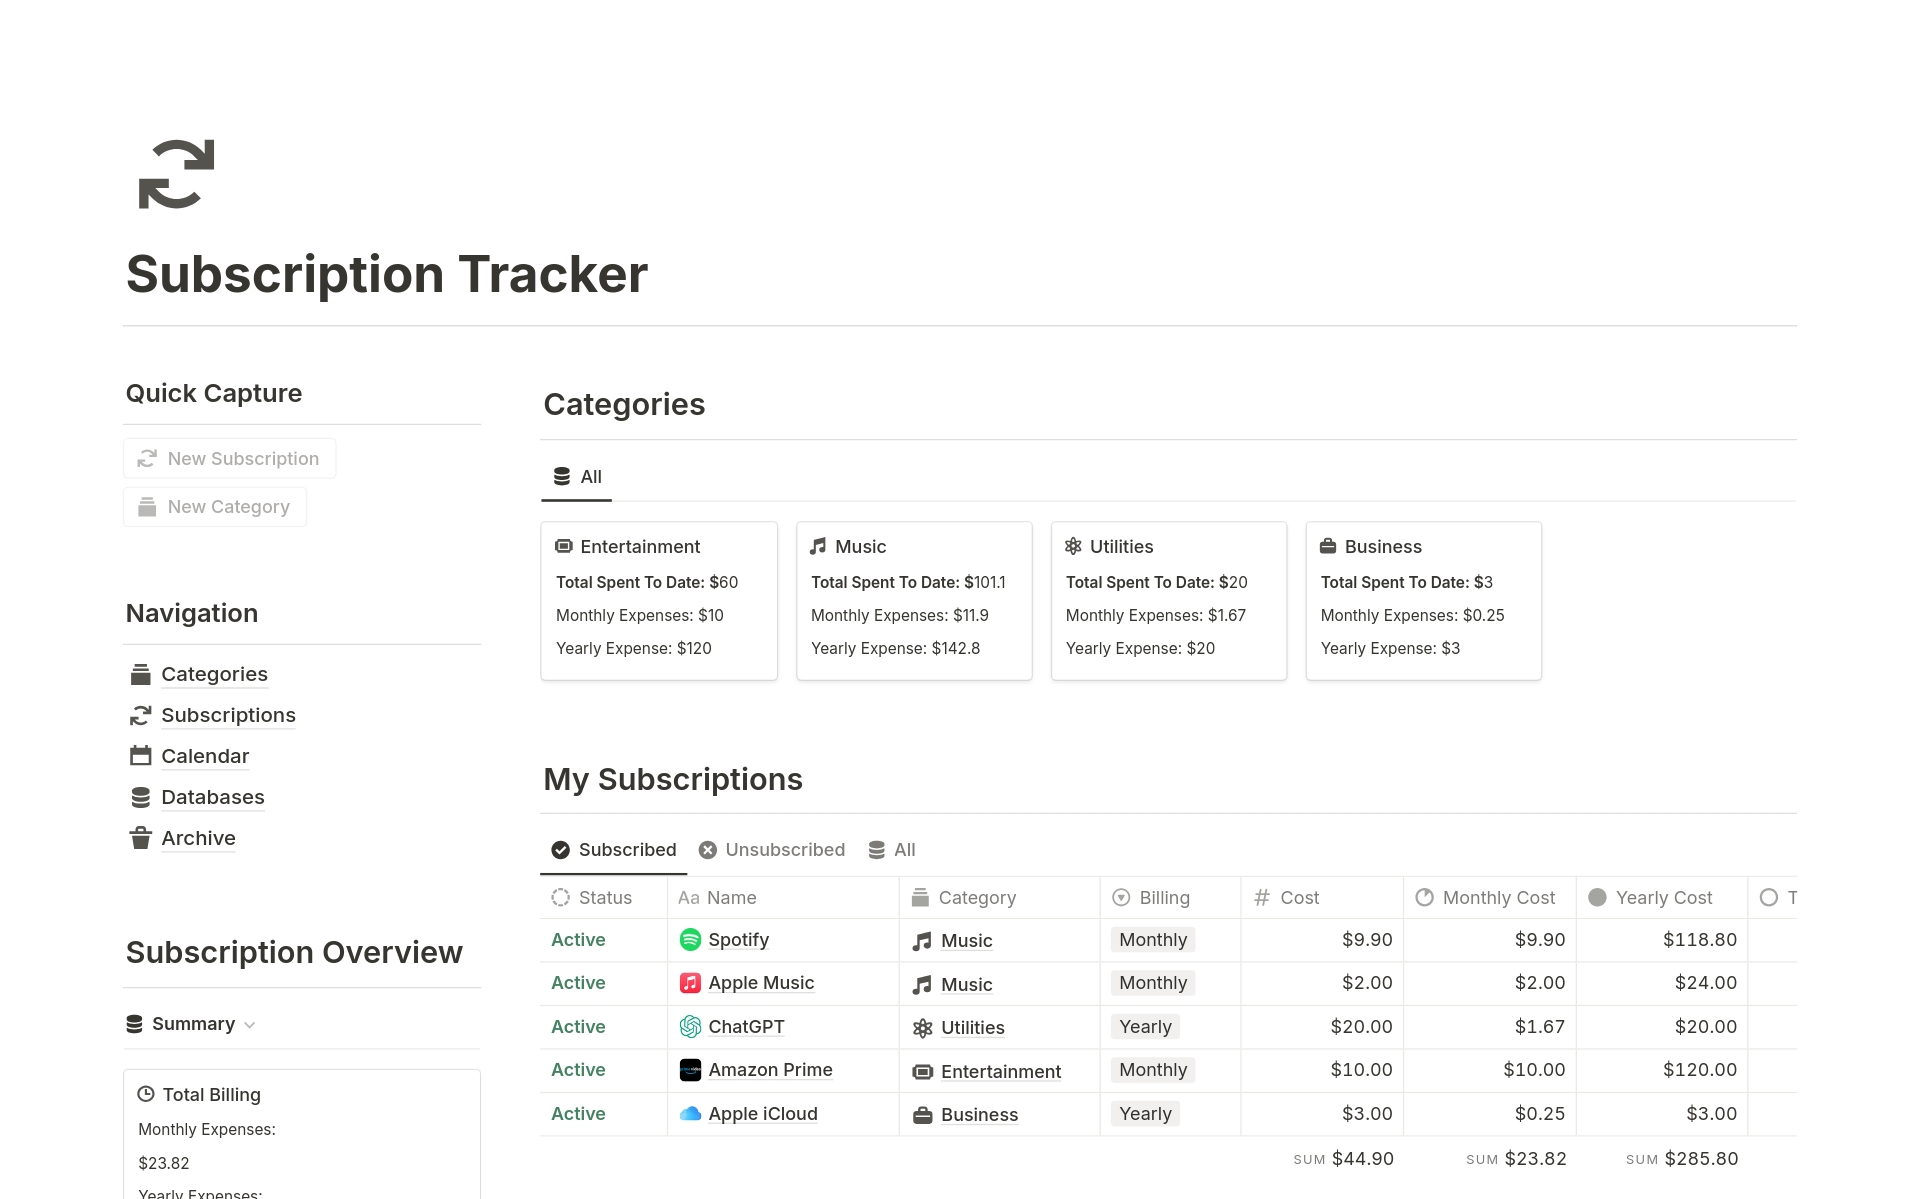 Ever wonder why your monthly expenses stay high with limited services? Our Subscription Tracker has
The template keeps tabs on all your subscriptions, lets you visualise average monthly and yearly costs, and identifies active and unused subscriptions.